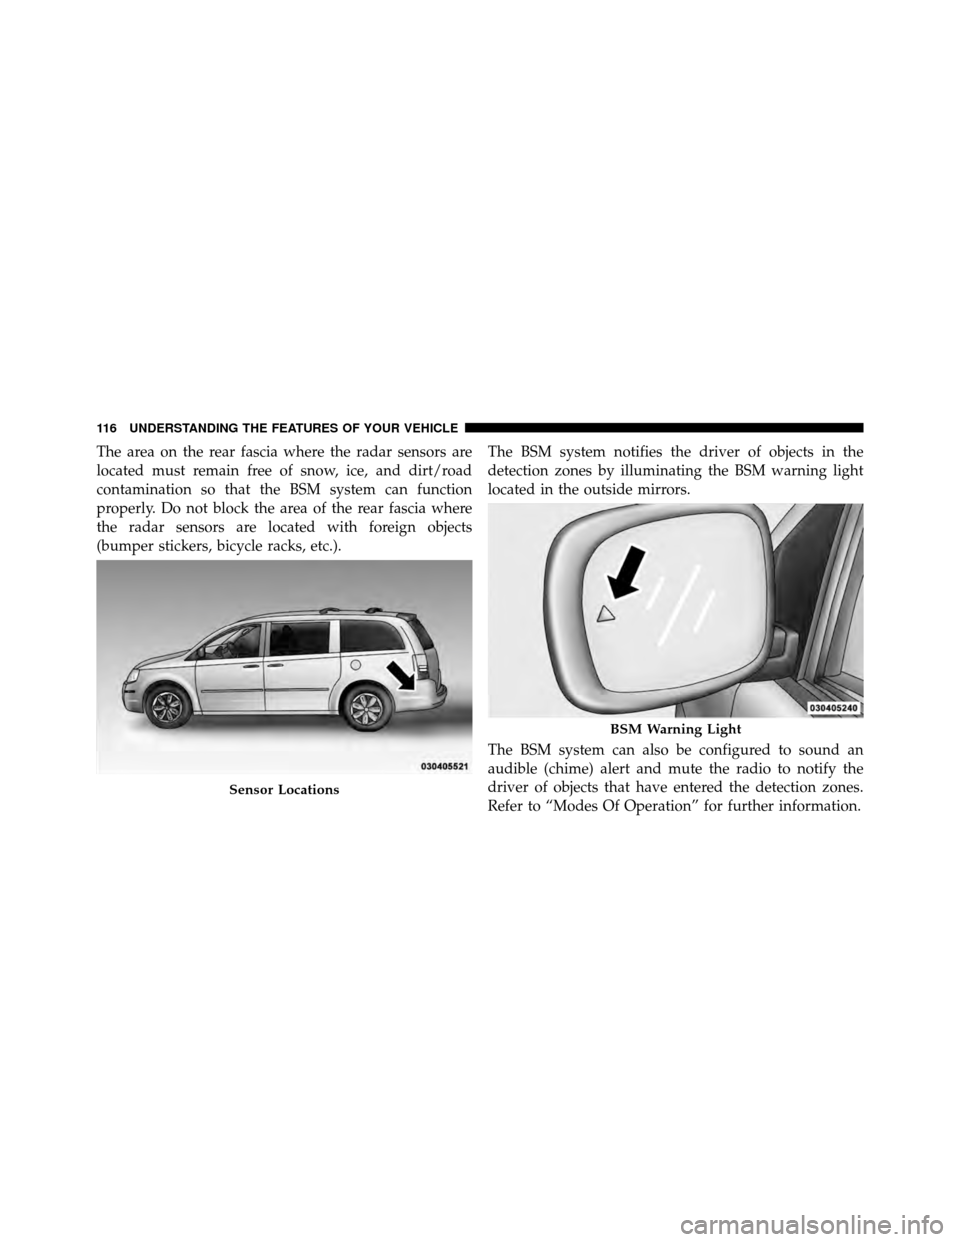 DODGE GRAND CARAVAN 2010 5.G Owners Manual 
The area on the rear fascia where the radar sensors are
located must remain free of snow, ice, and dirt/road
contamination so that the BSM system can function
properly. Do not block the area of the r